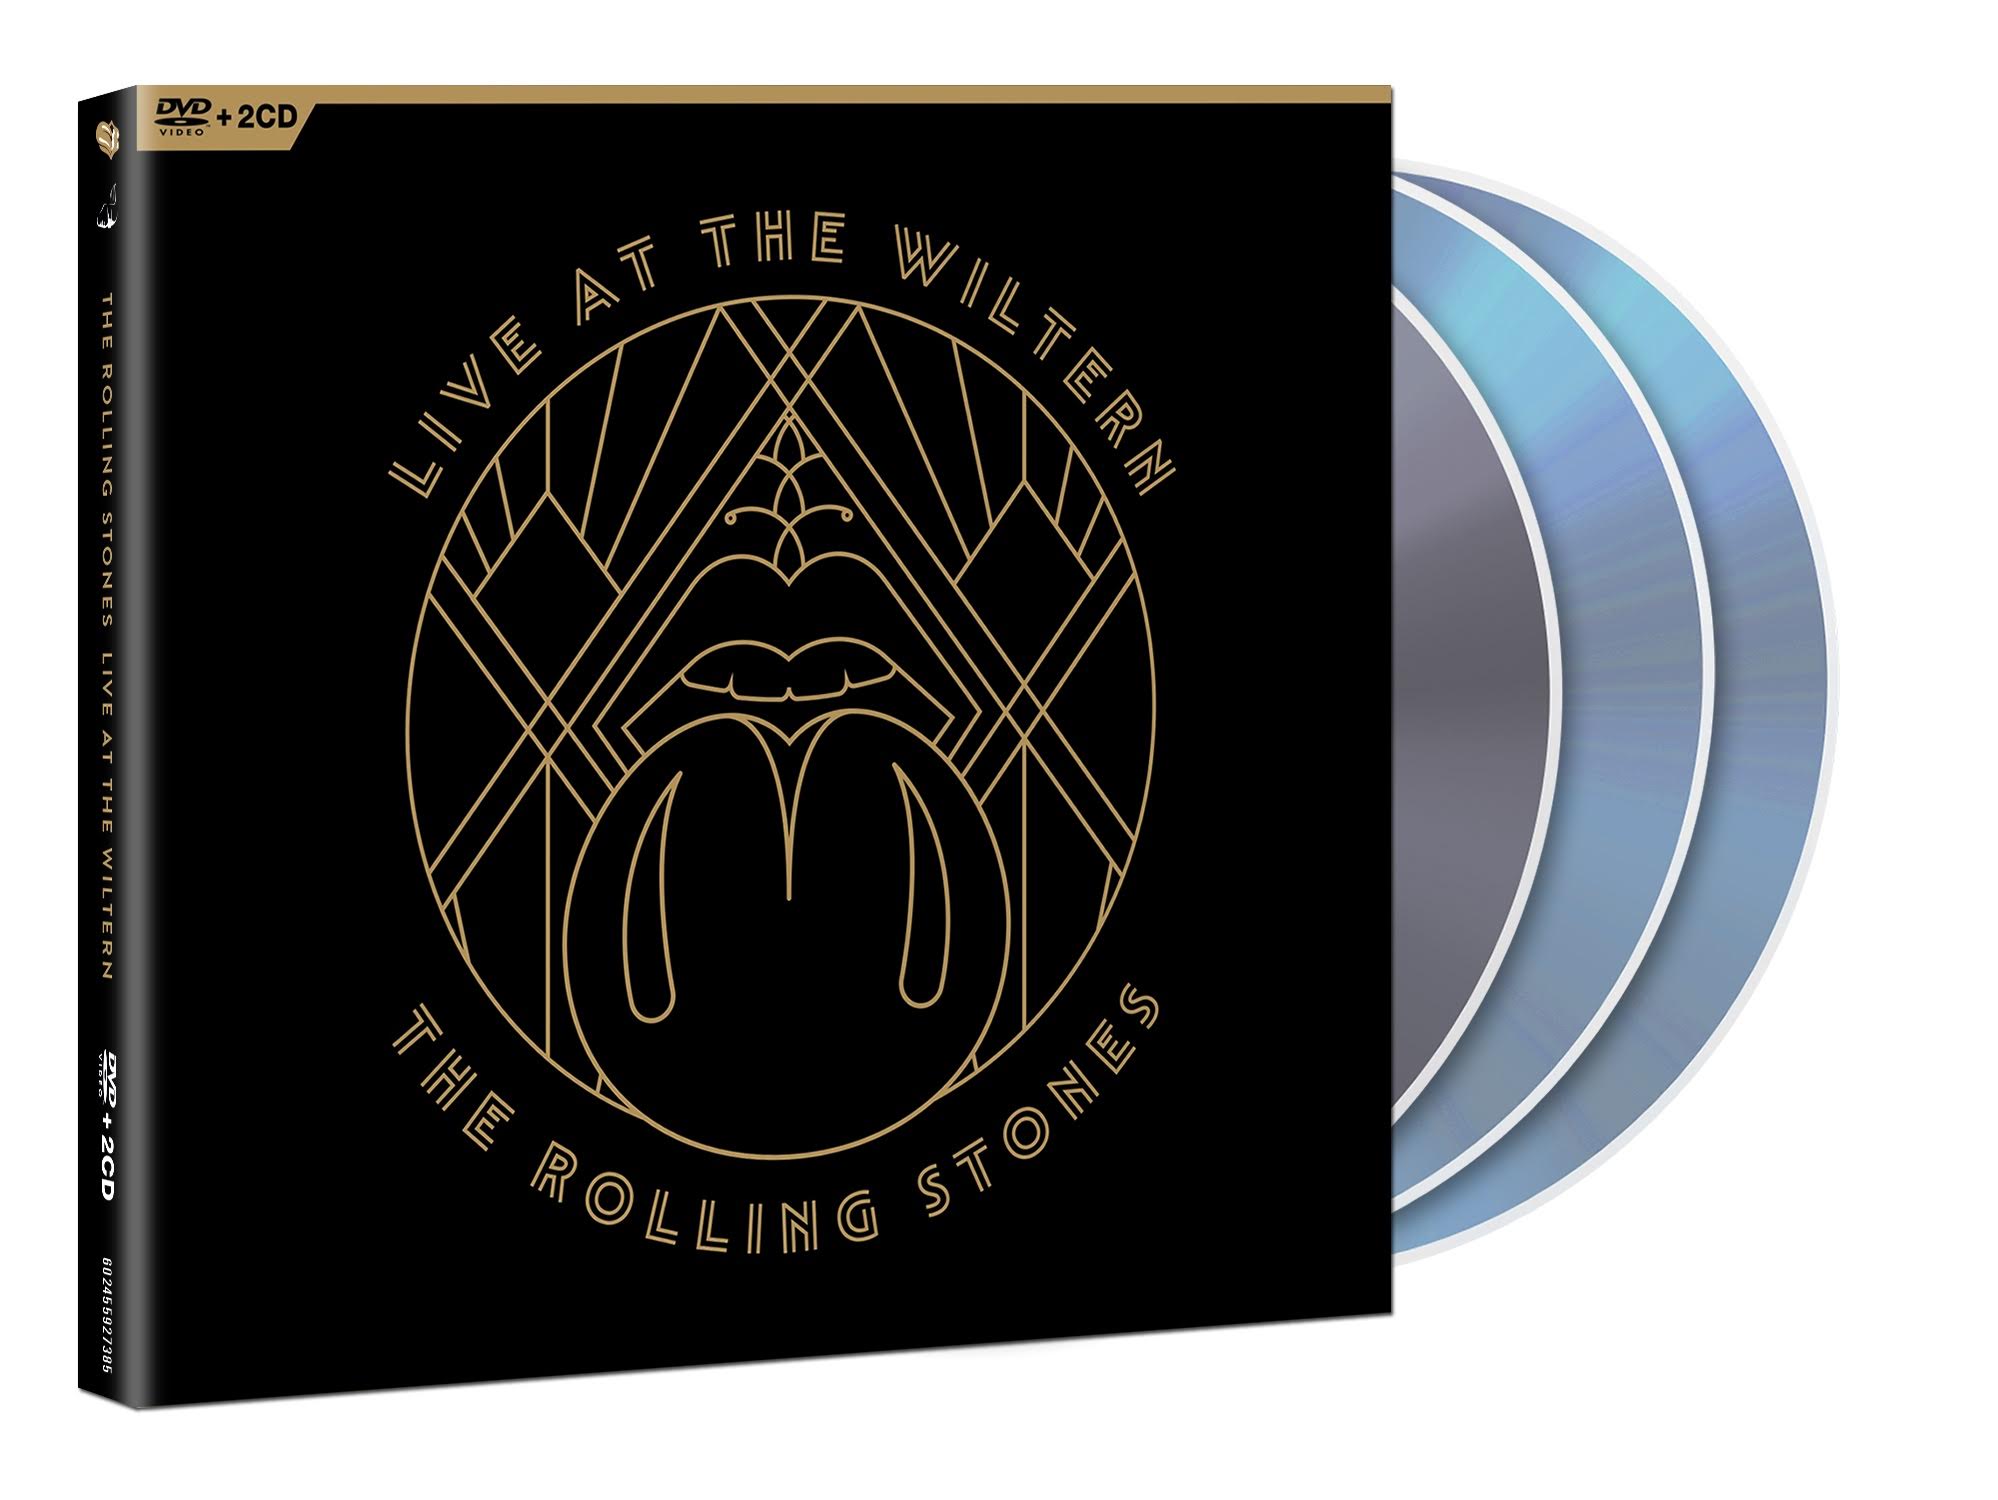 Rolling Stones- Live At The Wiltern (2CD+DVD)